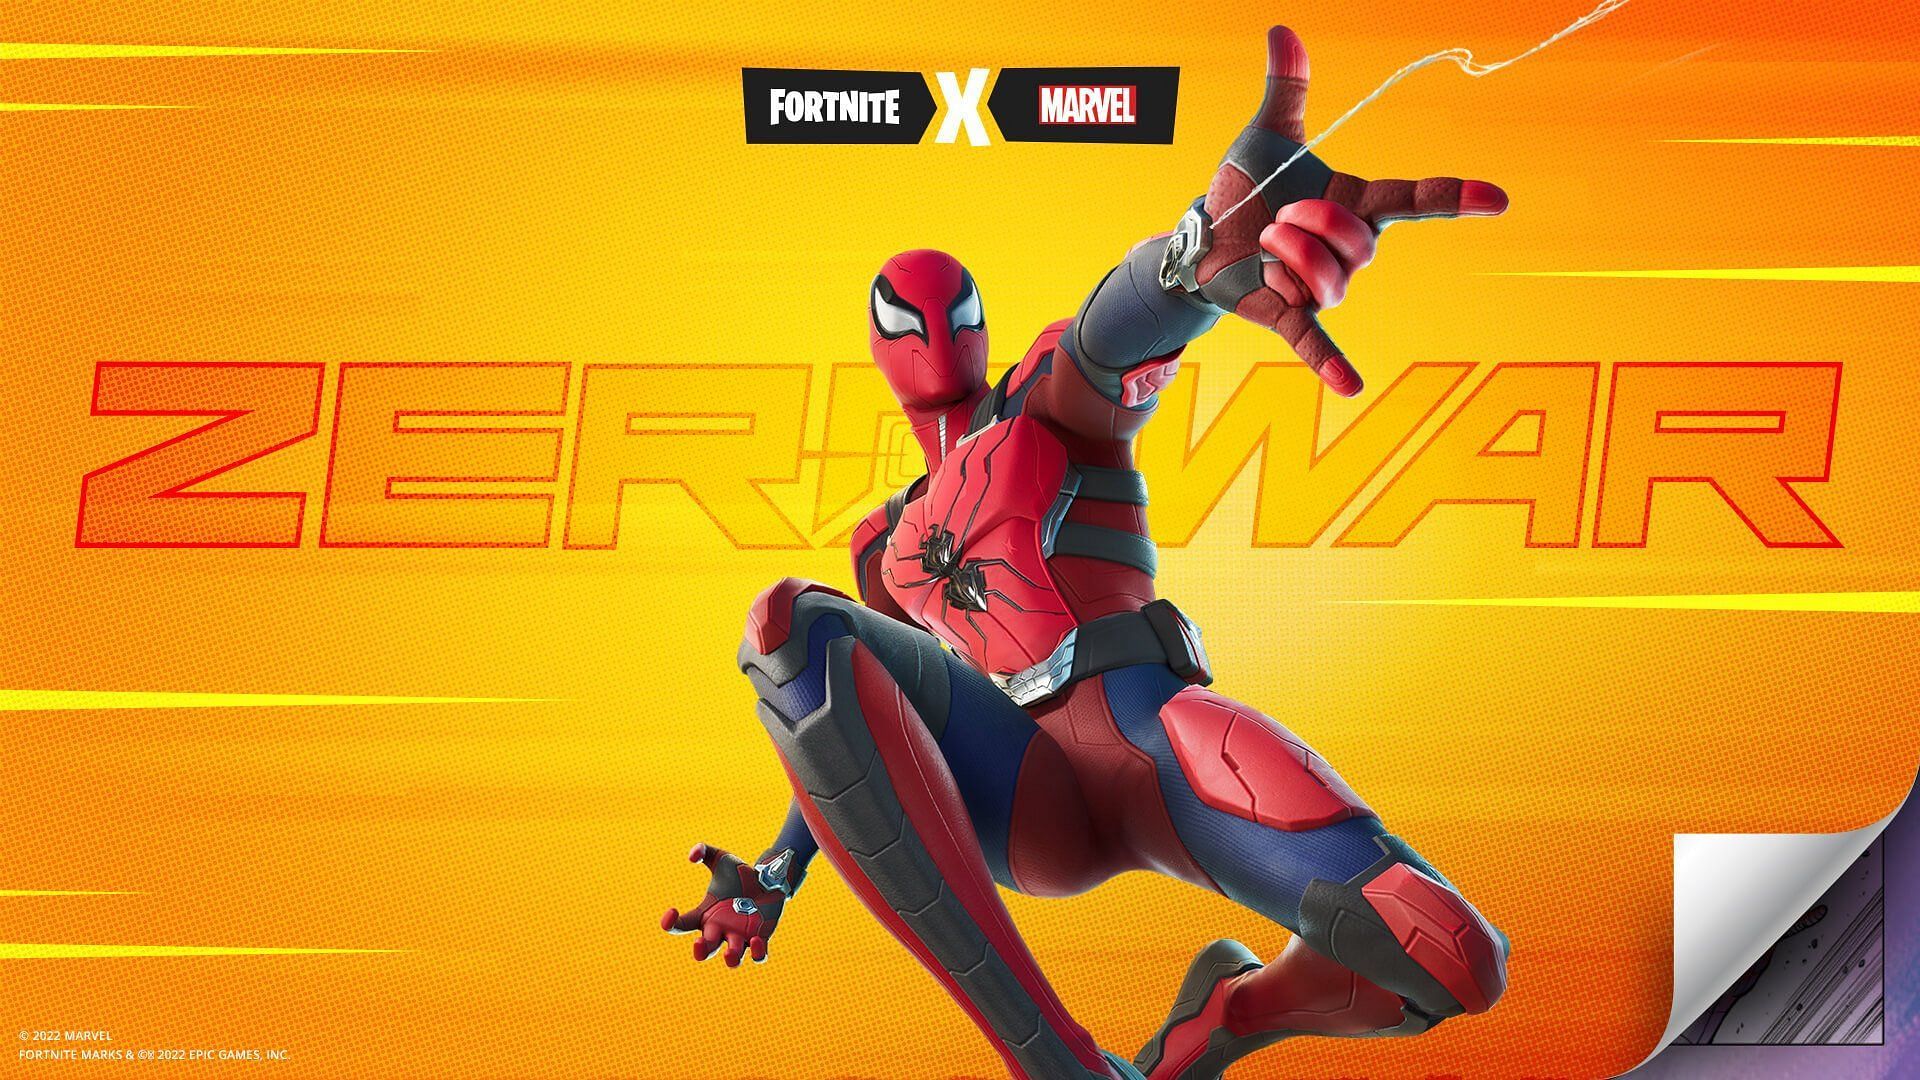 How to get the Zero Point x Marvel SpiderMan skin in Fortnite